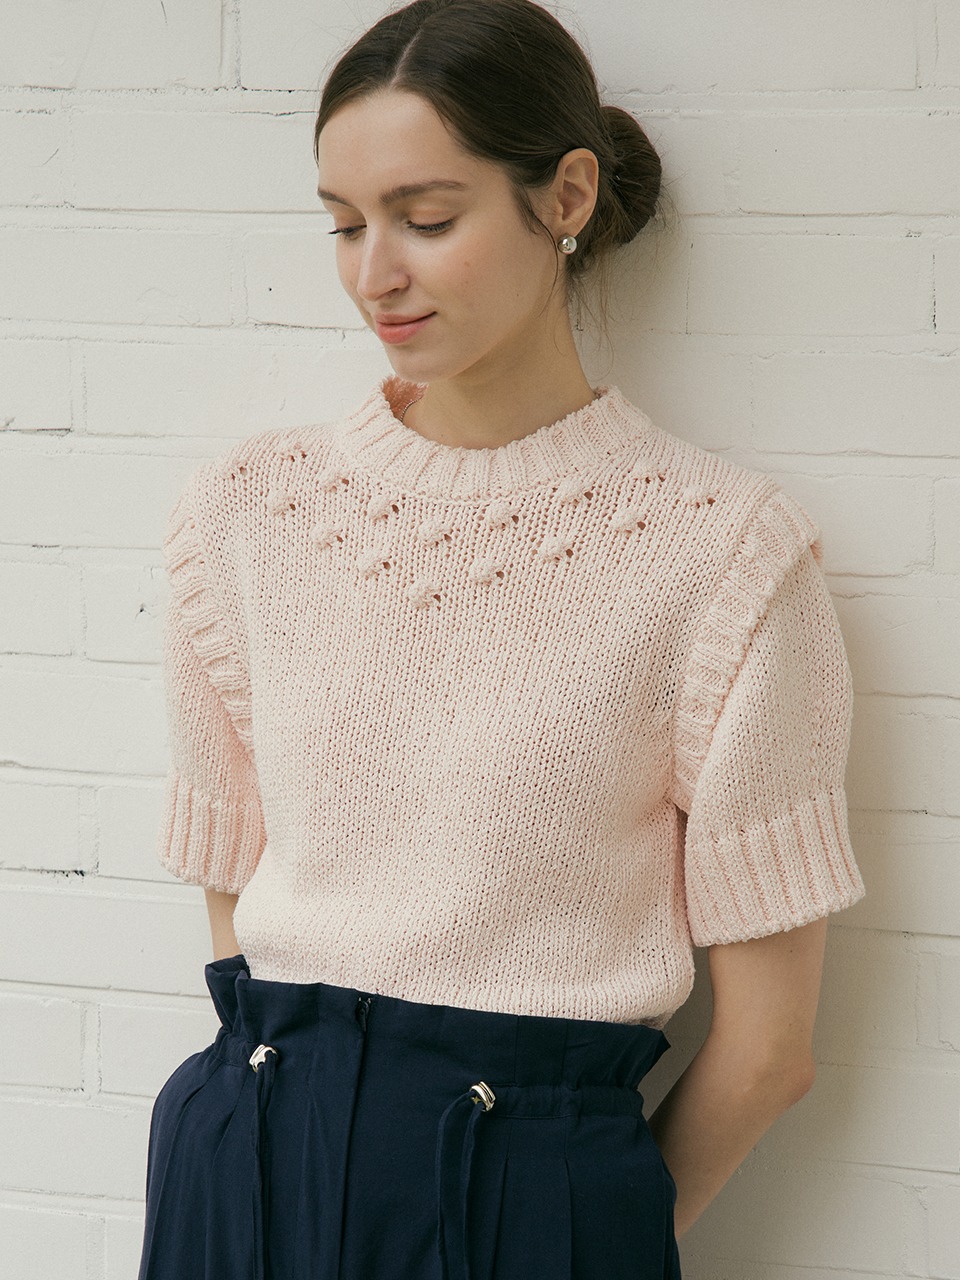 comos 688 ribbed cuffs Detail short-sleeved knit (pink)